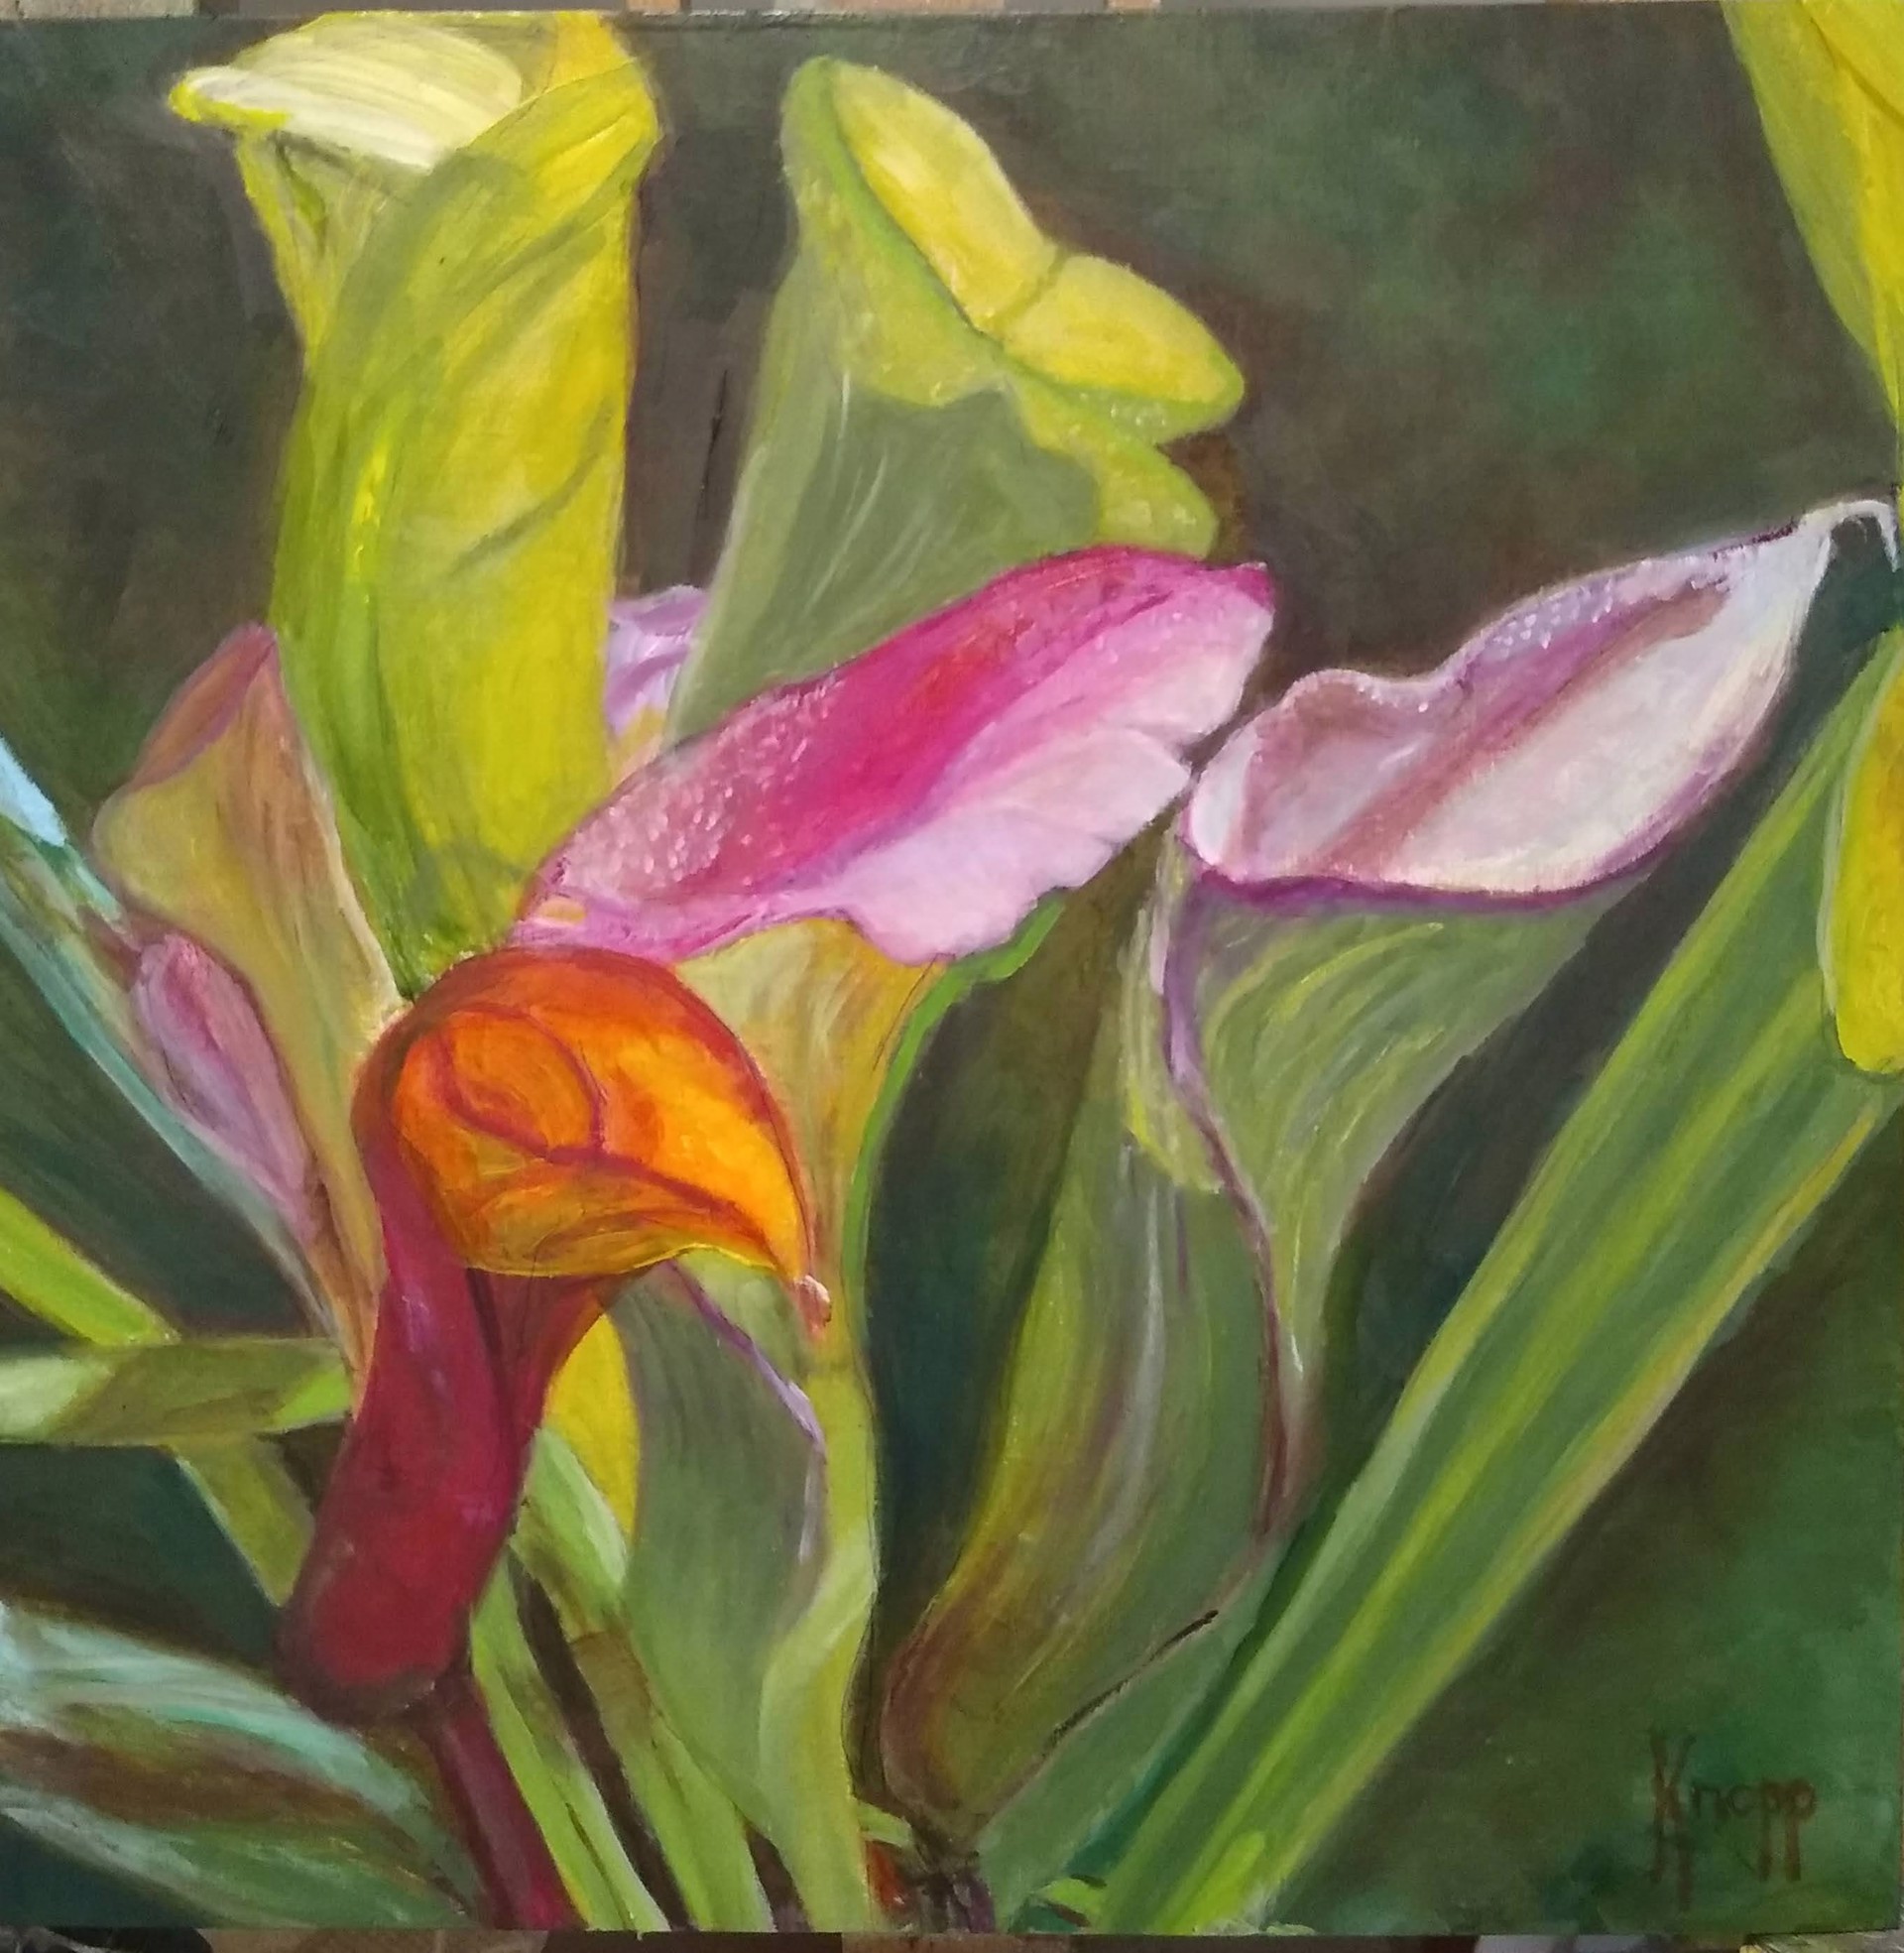 Cana Lilies by Kathy Knopp